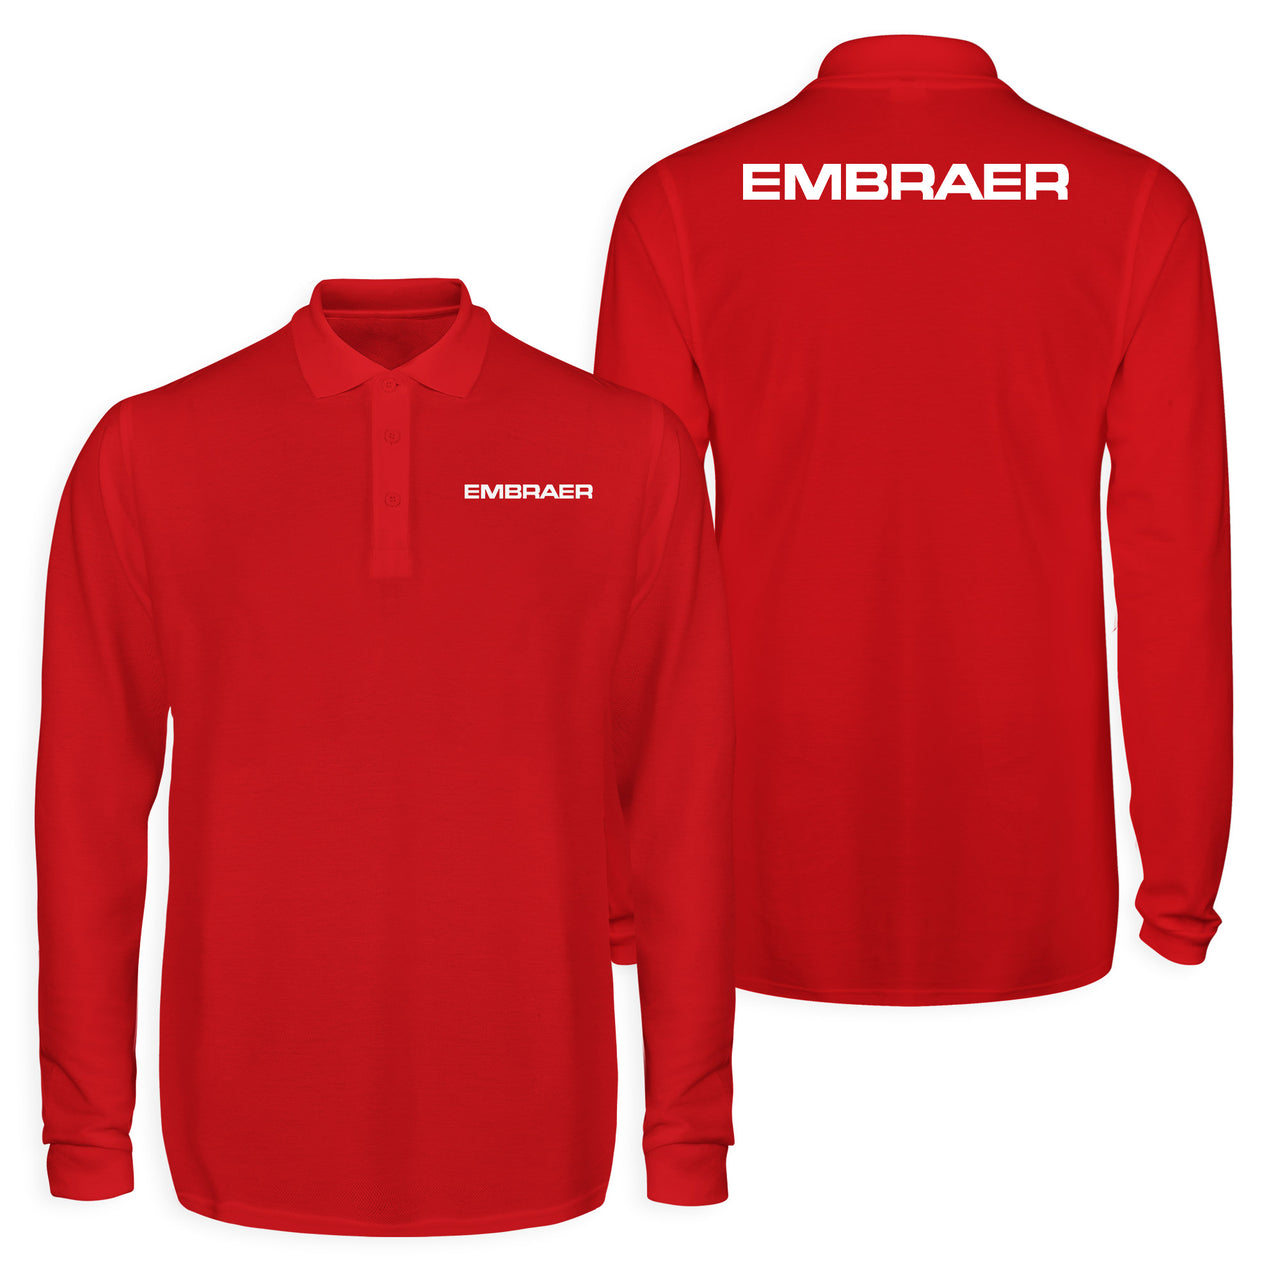 Embraer & Text Designed Long Sleeve Polo T-Shirts (Double-Side)